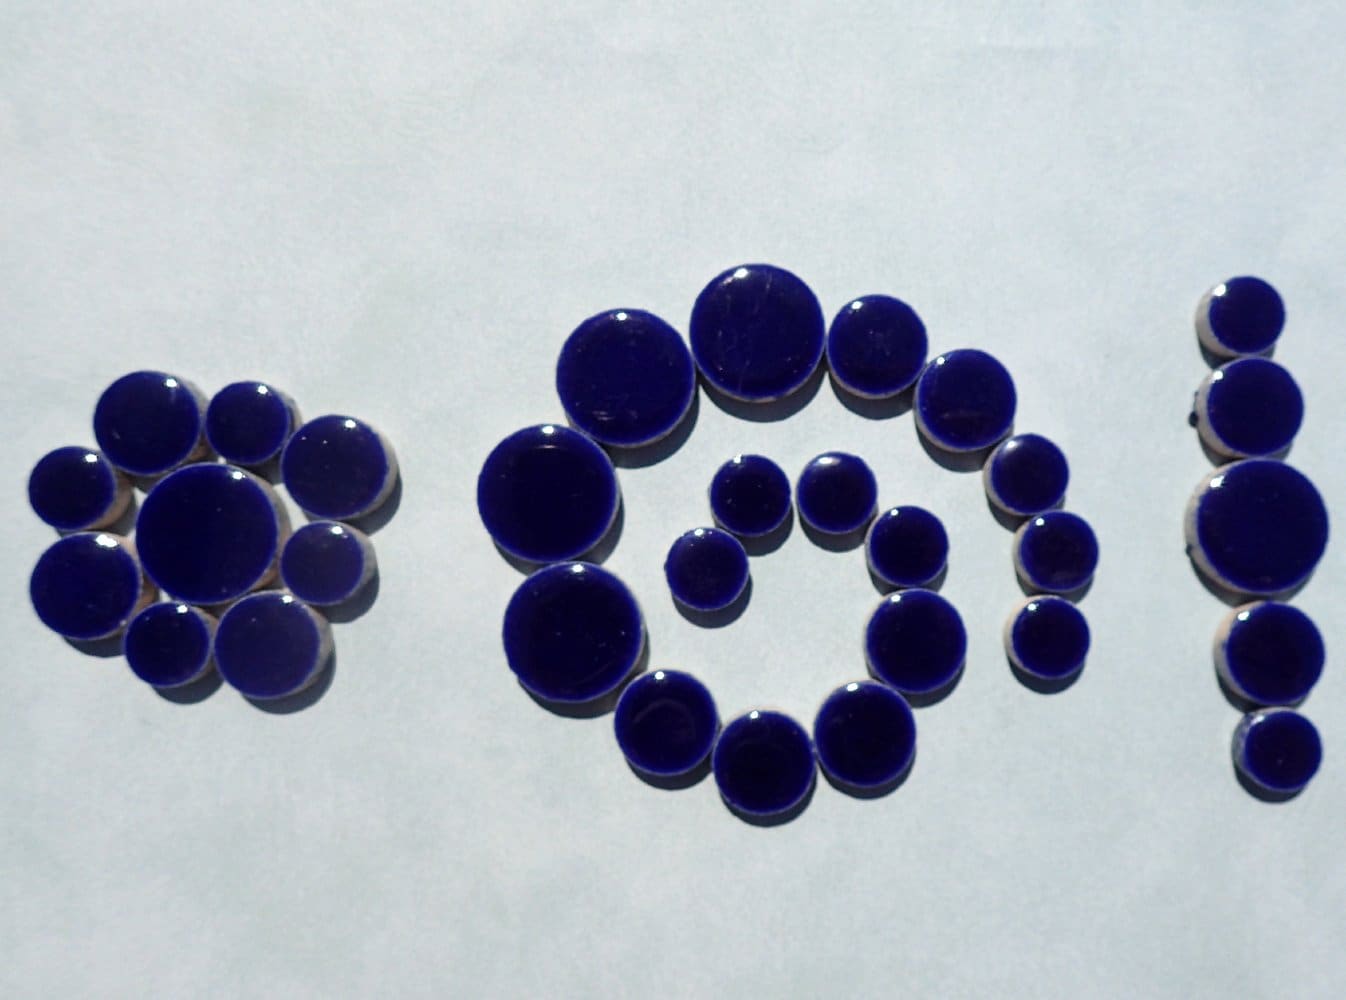 Dark Blue Circles Mosaic Tiles - 50g Ceramic in Mix of 3 Sizes 1/2" and 3/4" and 5/8" in Indigo